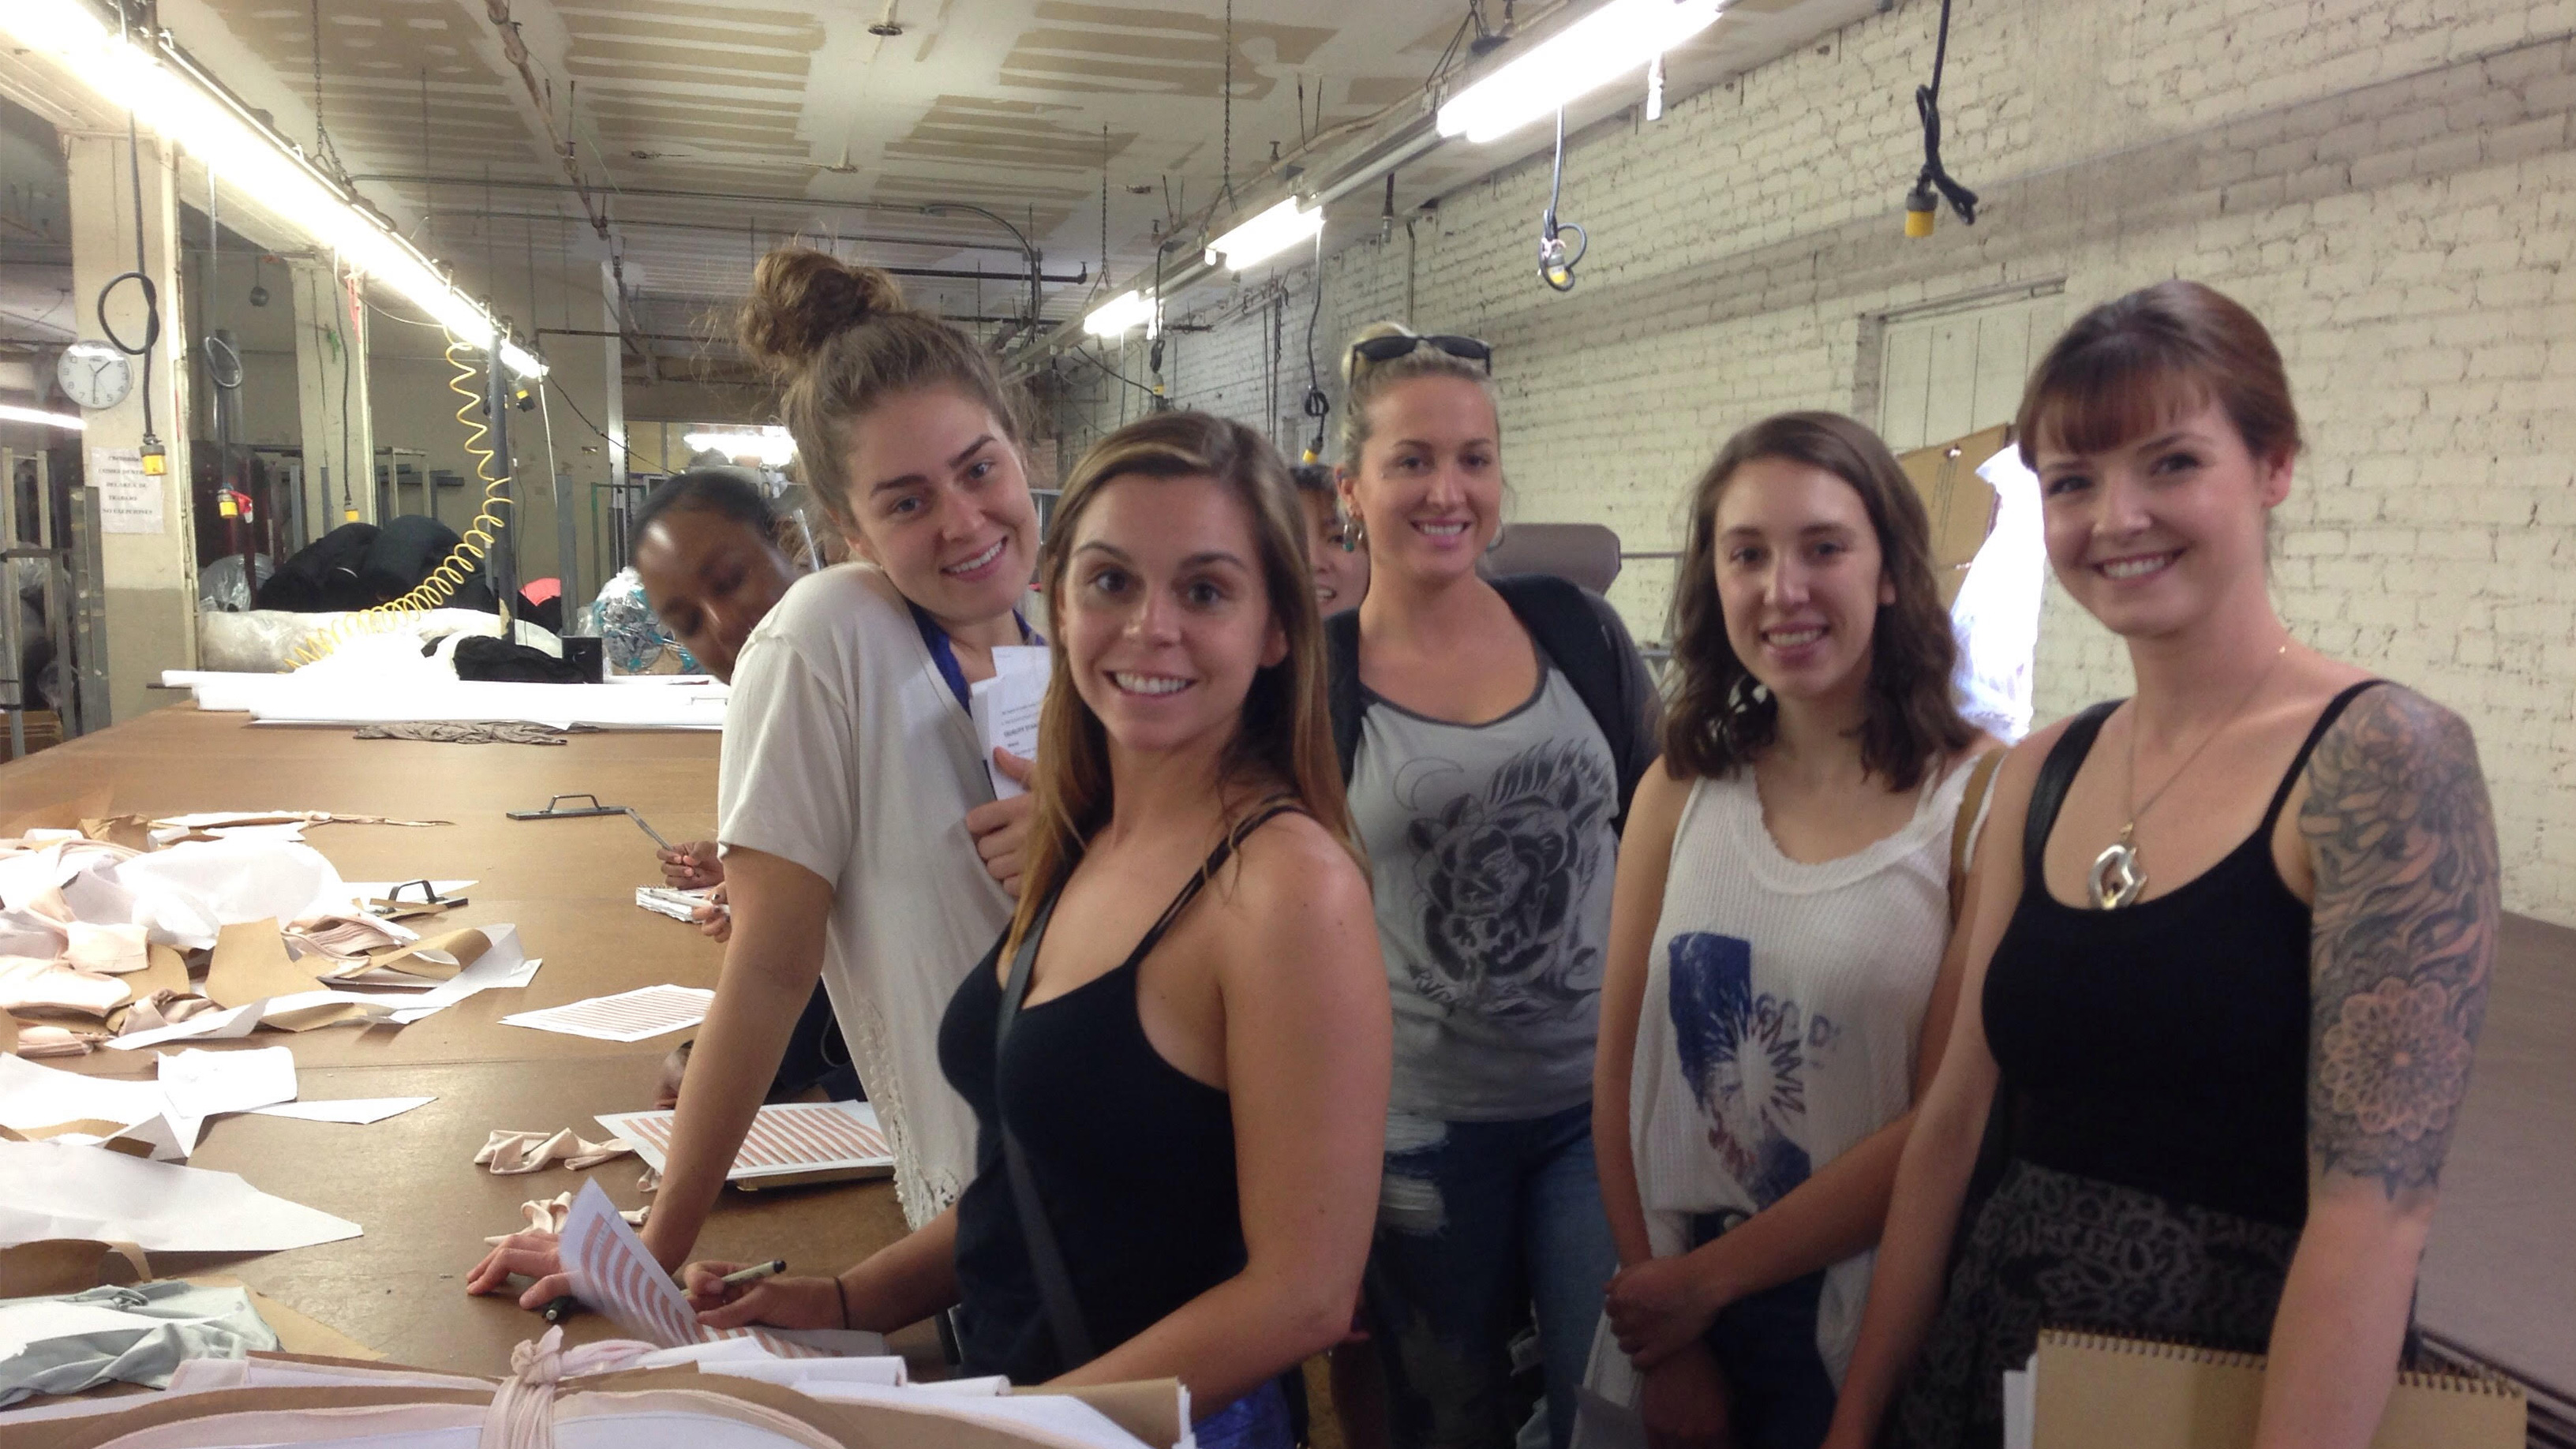 Supply Chain Management Field Trip to Local L.A. Sewing Factory